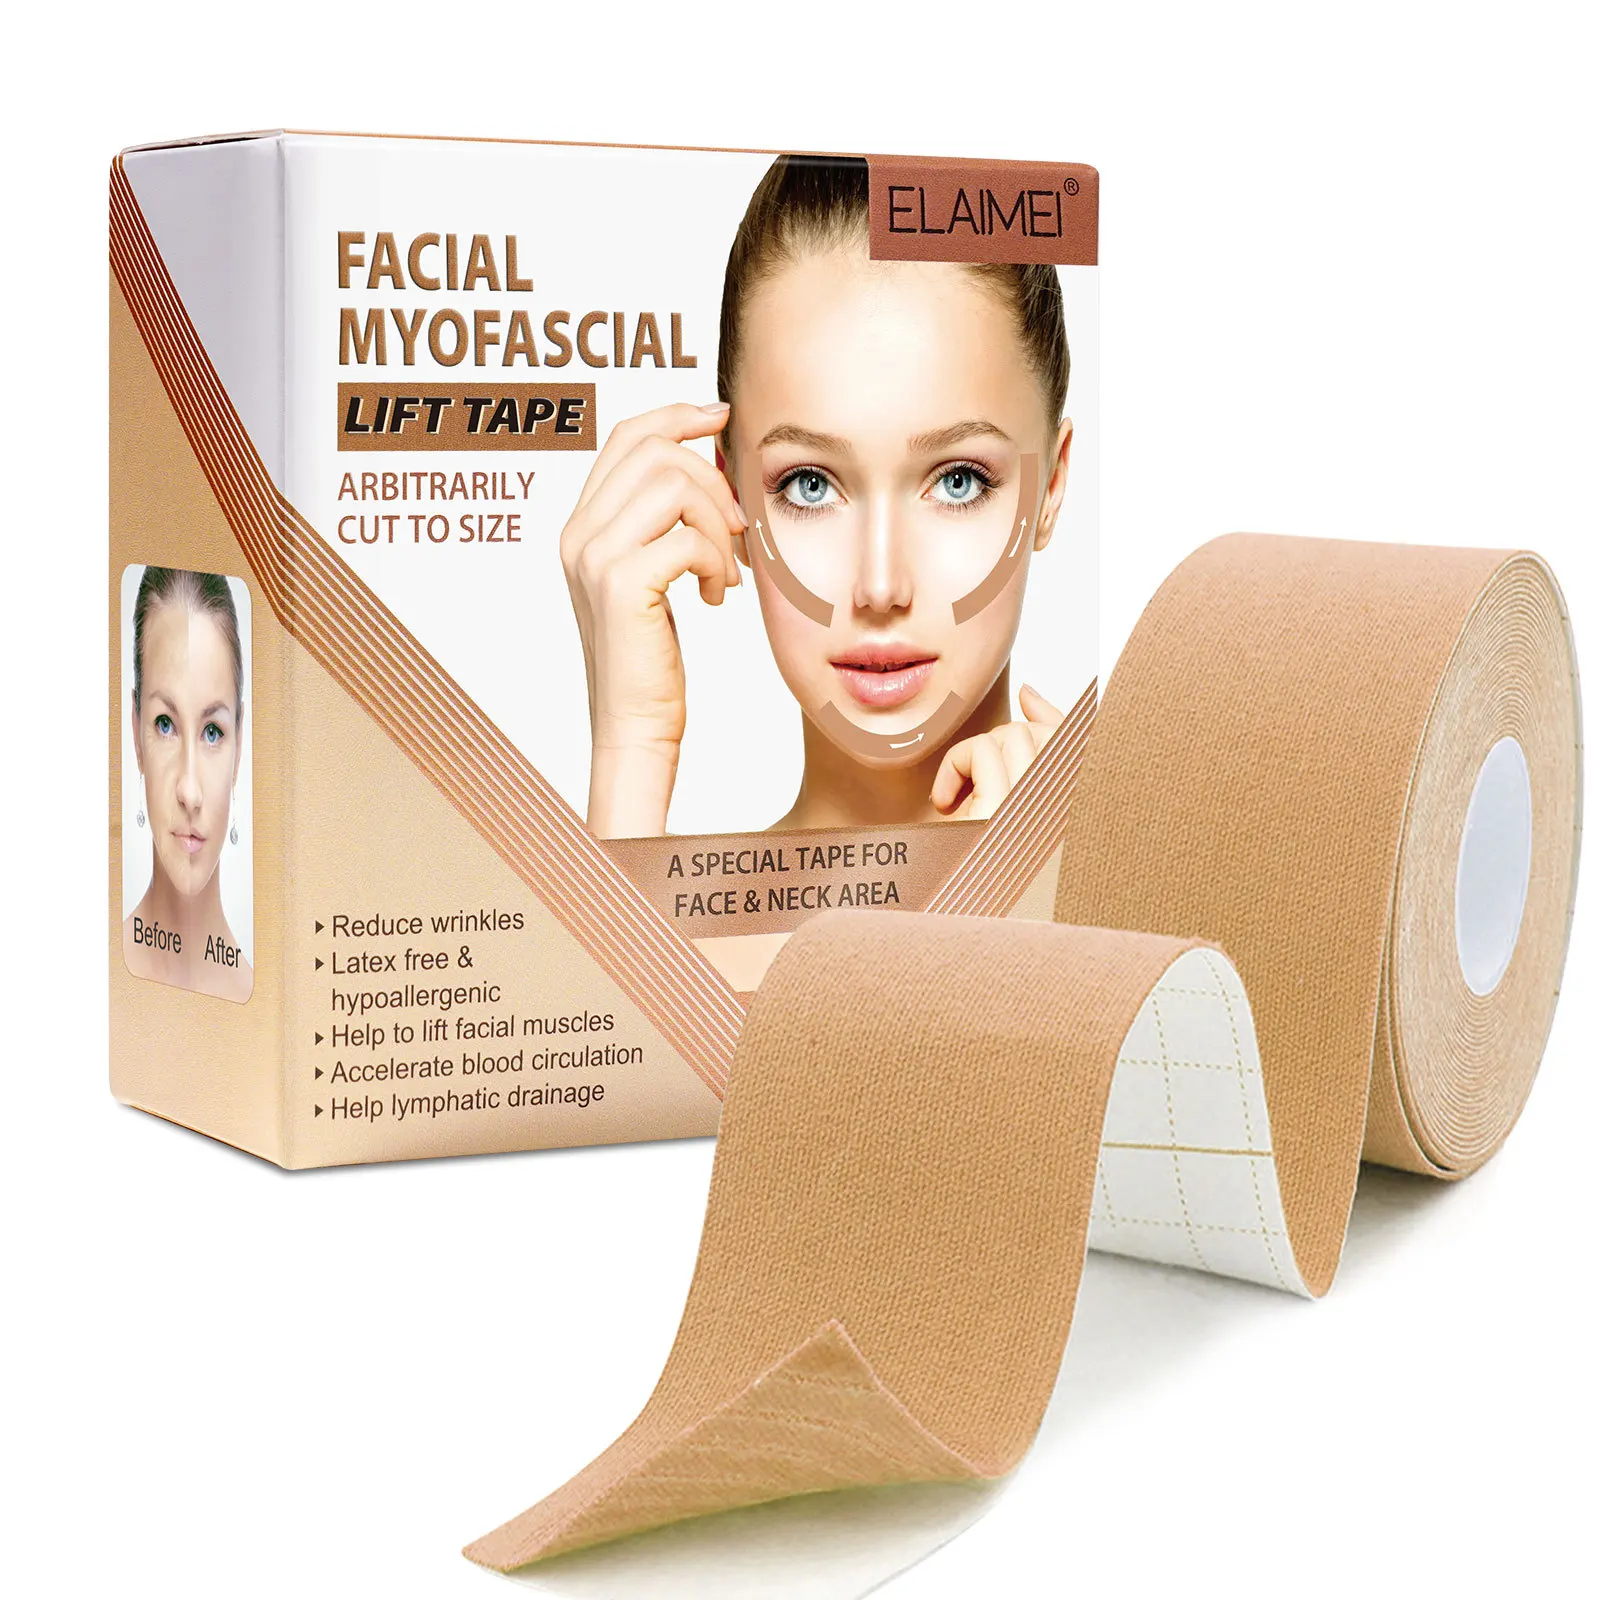 2.5CM*5M Instant Facial Myofascial Lift Tape For Face Neck Eyes Skin Lifting Tool Wrinkle Removal Sticker V Face Elastic Bandage invisible face stickers neck eye lifter sticker anti sticker tape patch removal wrinkle slimming tape lift aging face facia t1w2